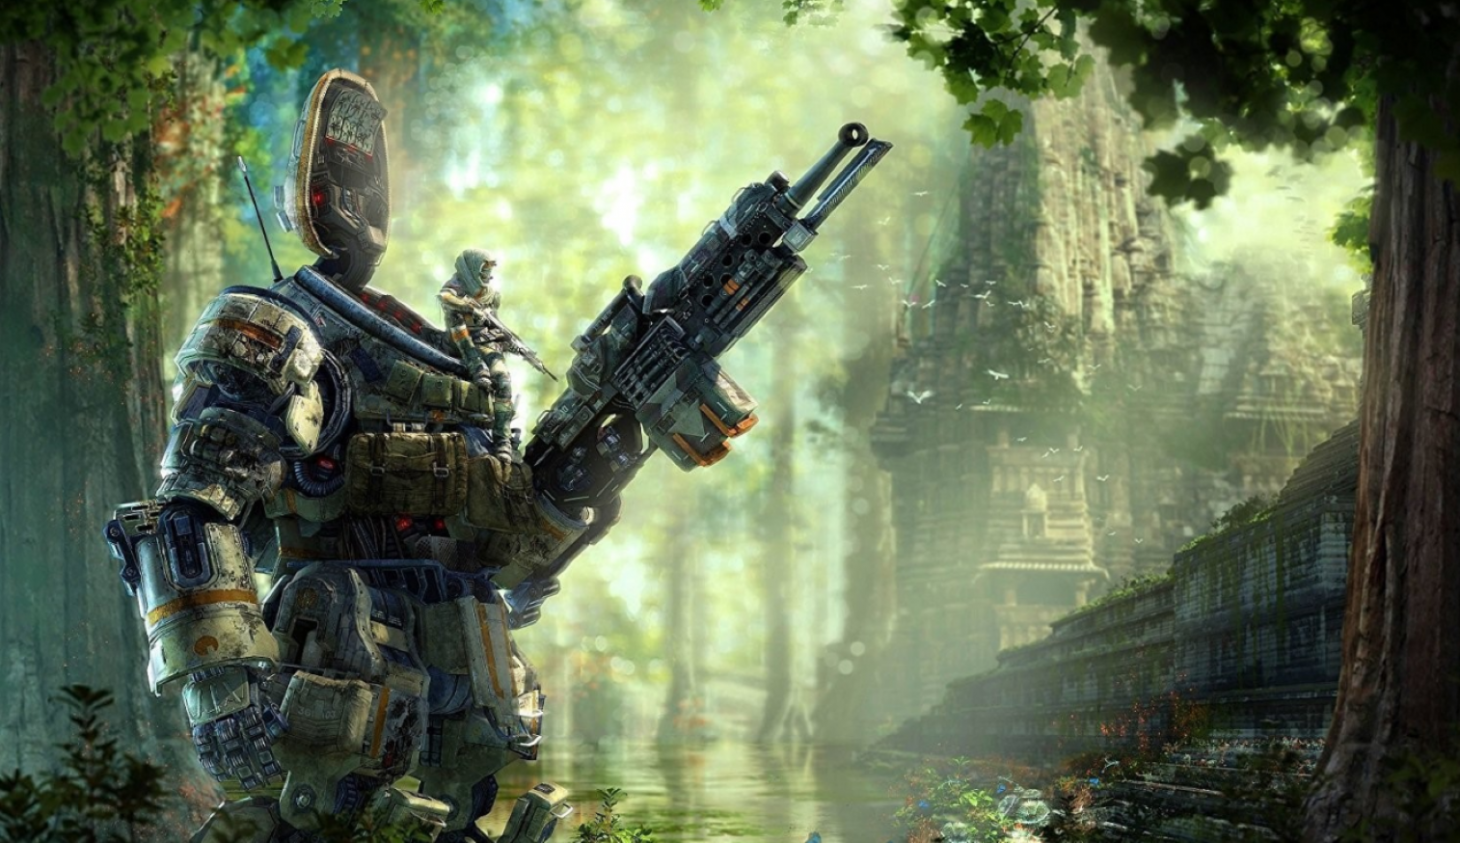 BREAKING: Respawn confirms they are investigating a security vulnerability  in Titanfall 2 - Inven Global